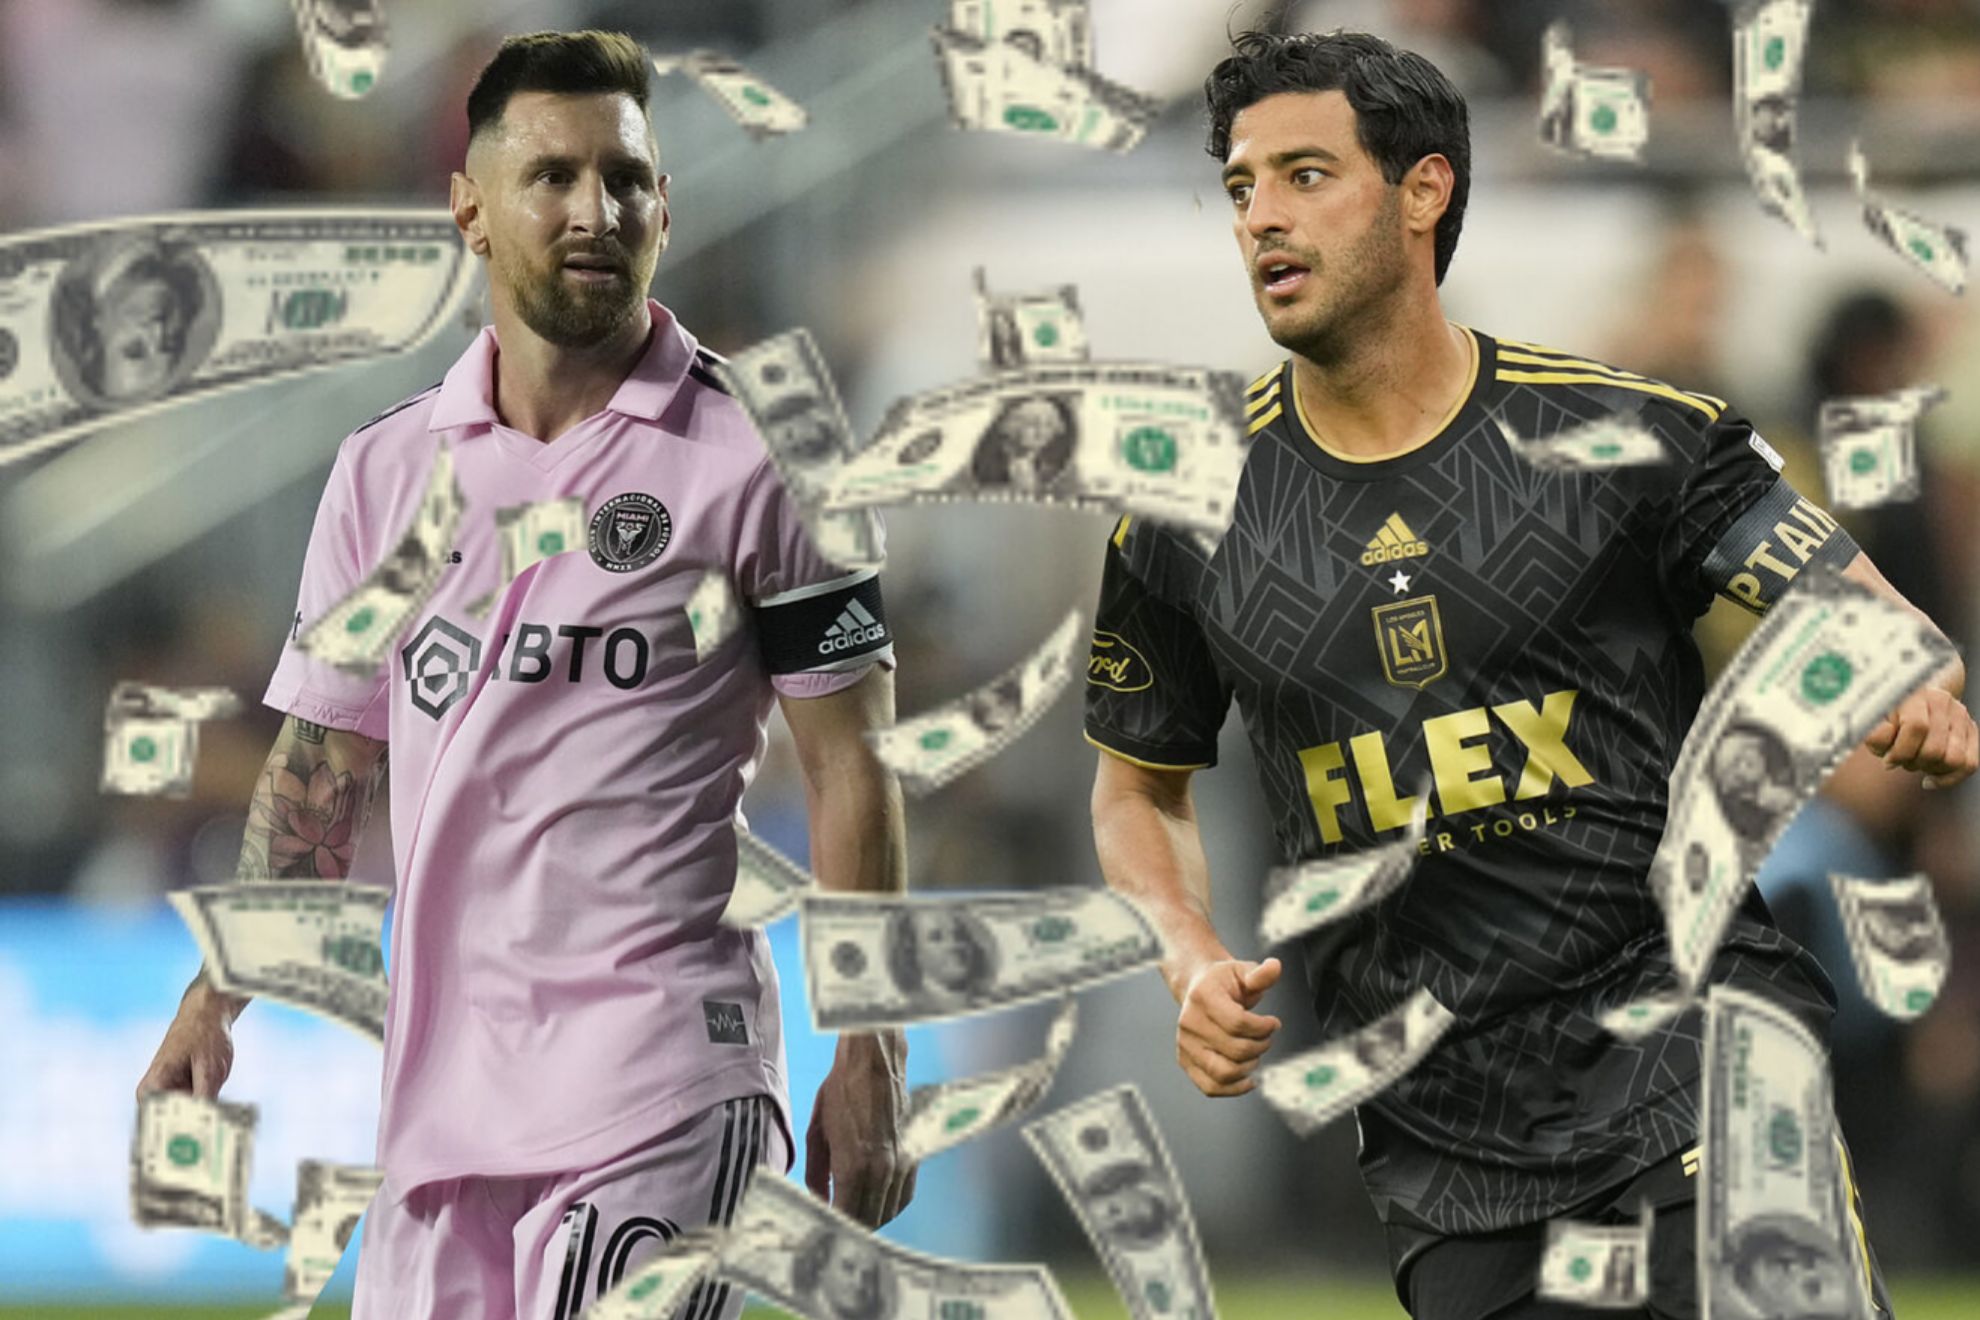 Lionel Messi and Carlos Vela in the top 5 of best-selling jerseys